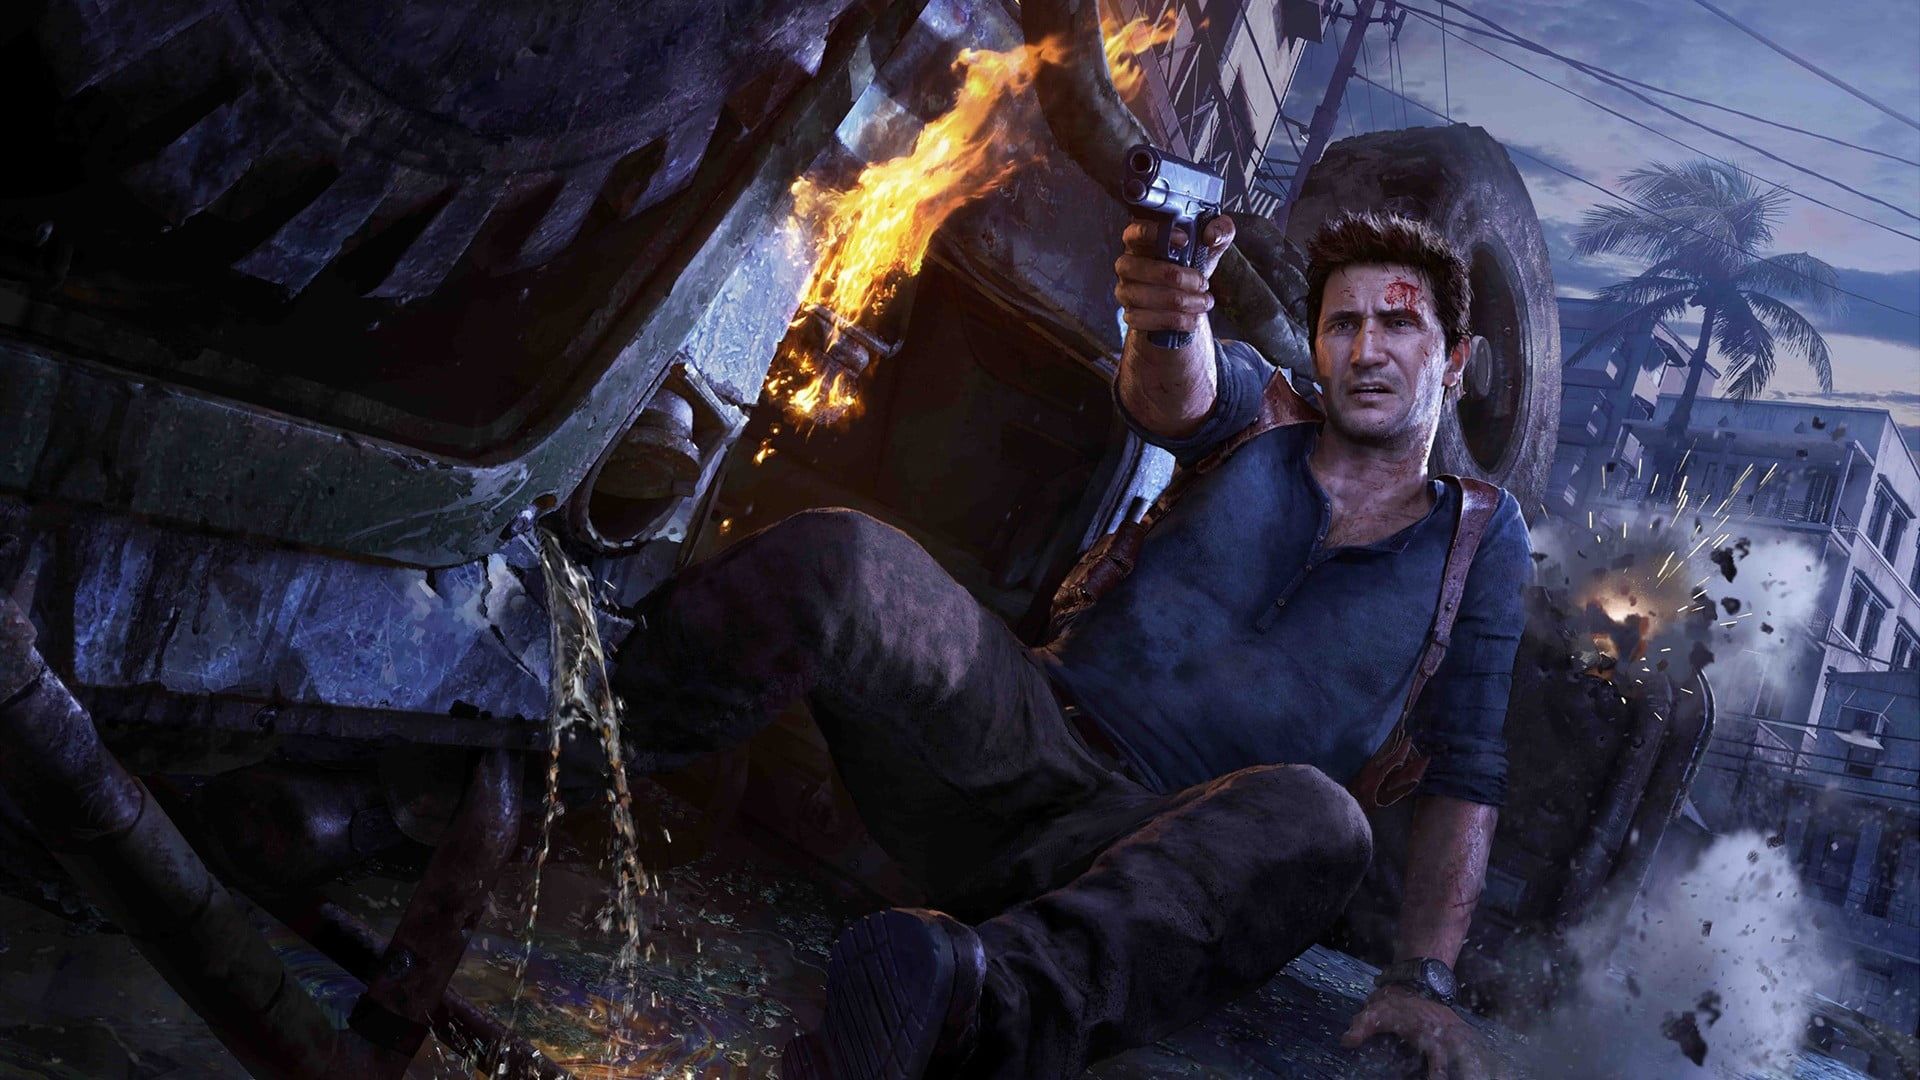 Uncharted 4: A Thief's End Wallpapers